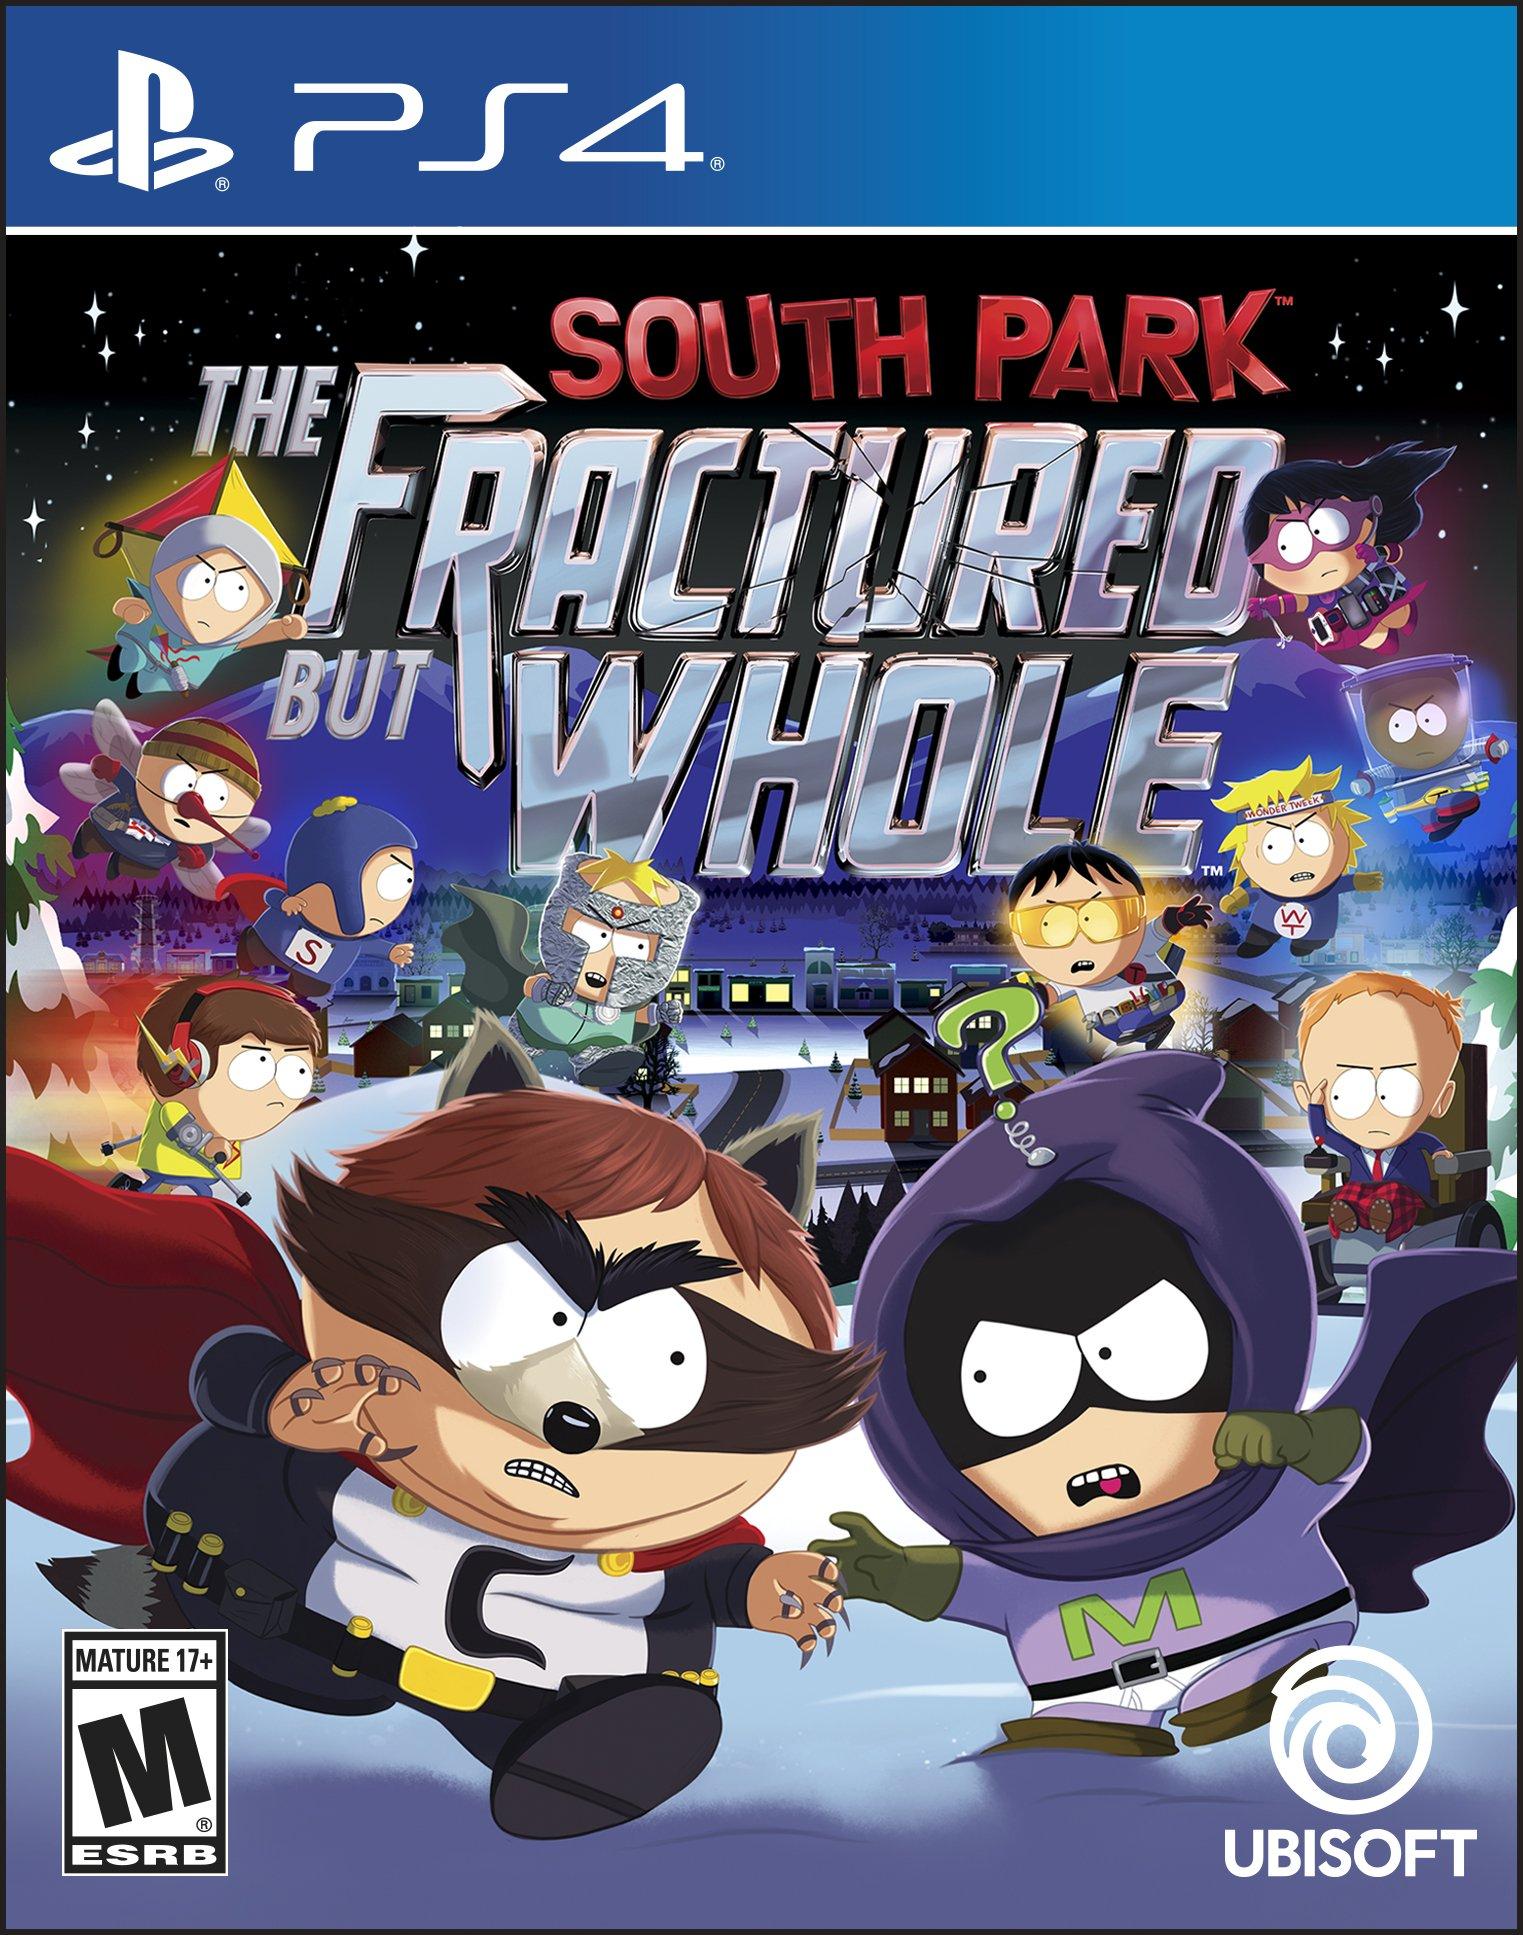 South Park: The Fractured But Whole (Pre-Owned, PS4) $5.99 + Free Store Pickup at GameStop (Limited Availability)